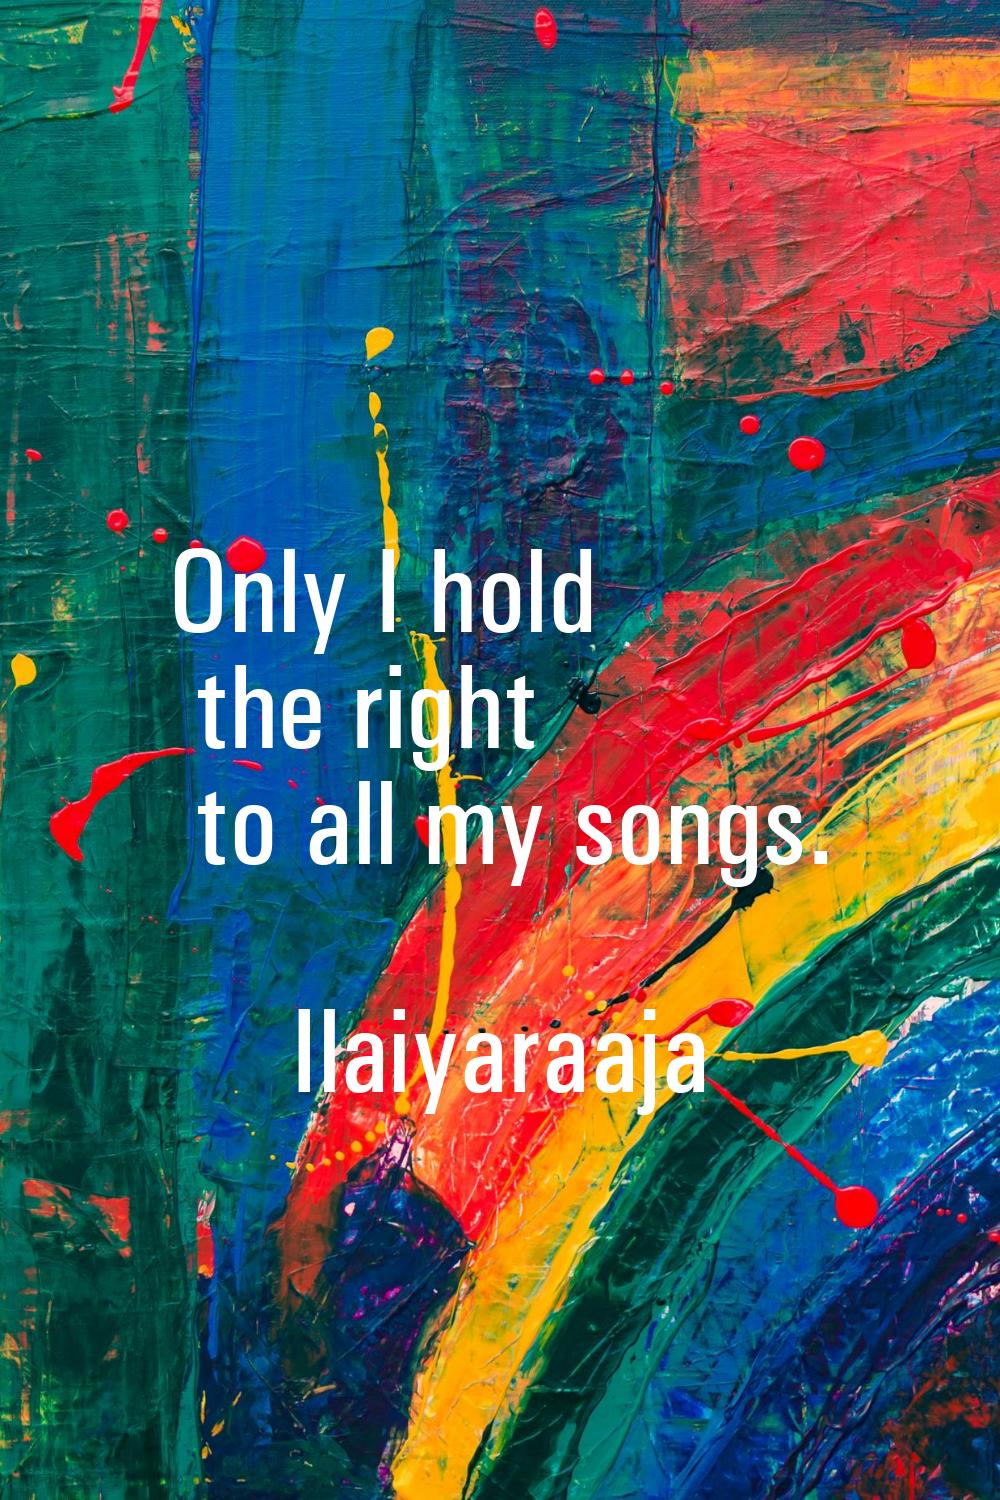 Only I hold the right to all my songs.